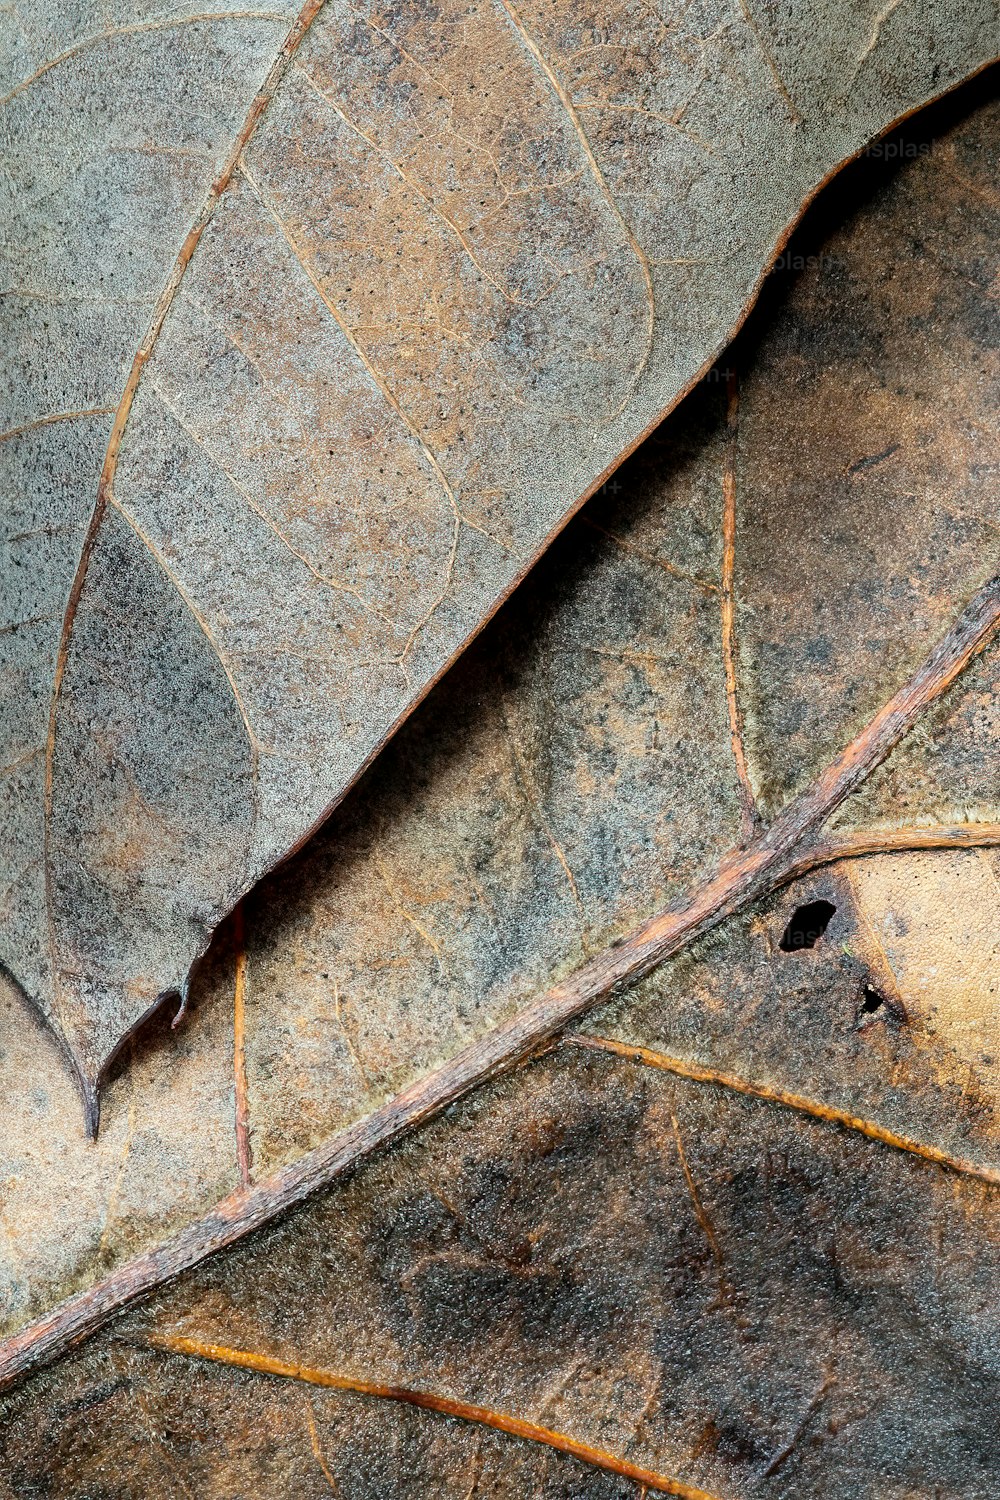 a close up of a leaf that is brown